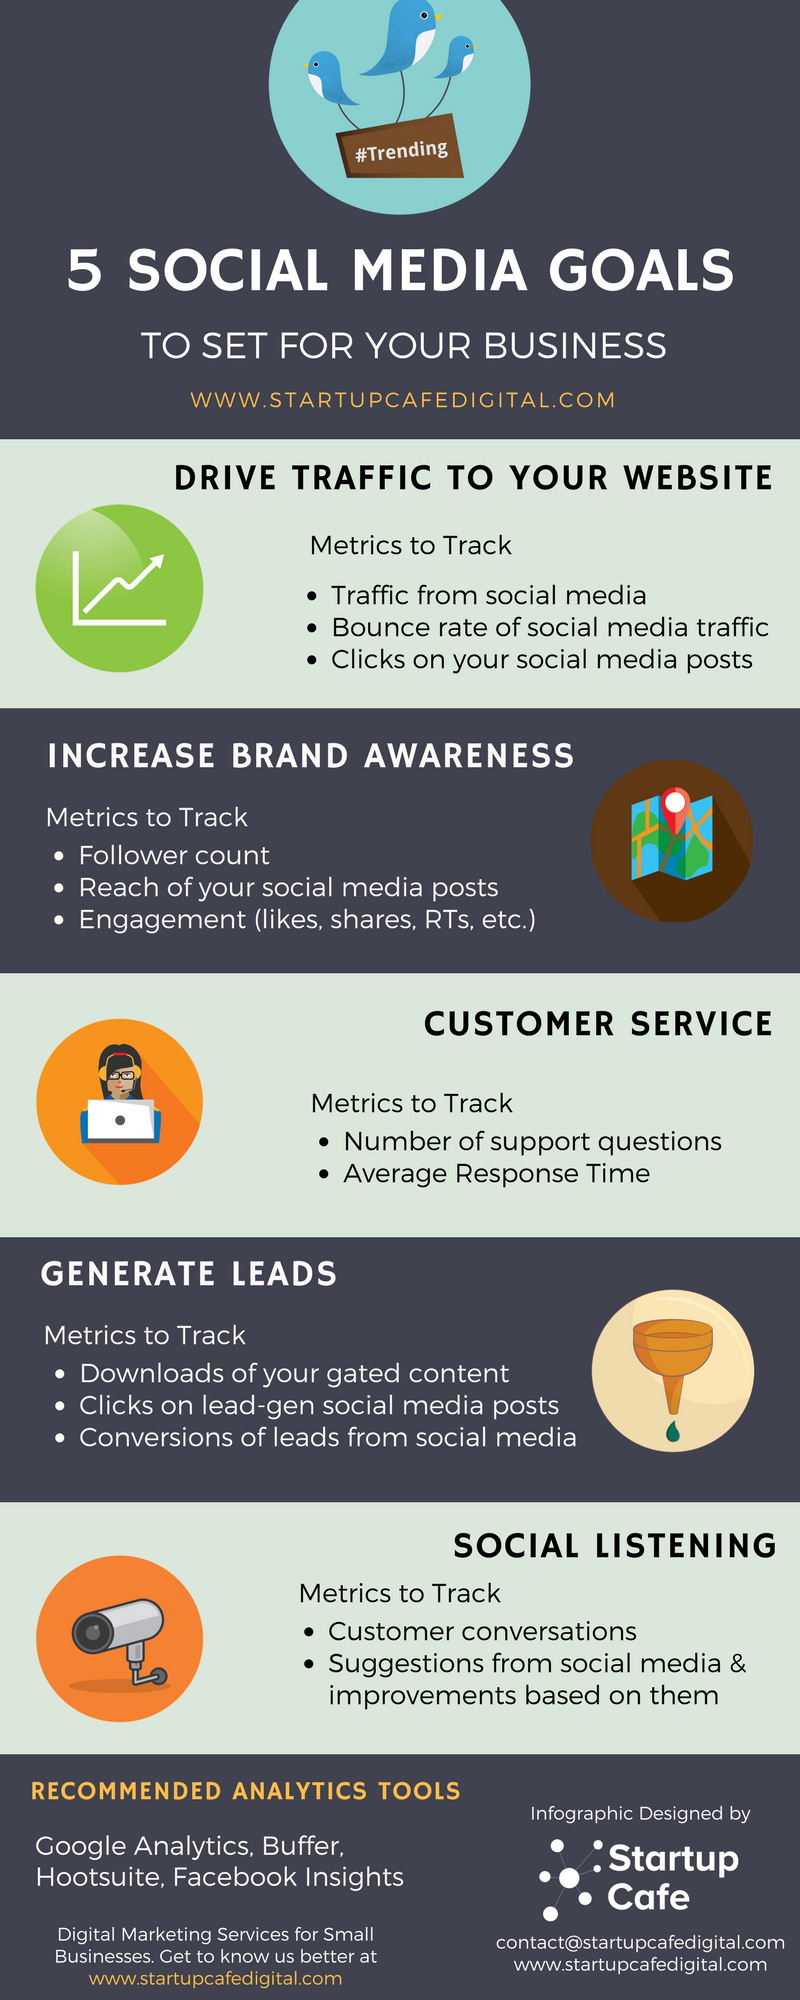 5-Social-Media-Goals-to-Set-for-Your-Business-Infographic-galleryr